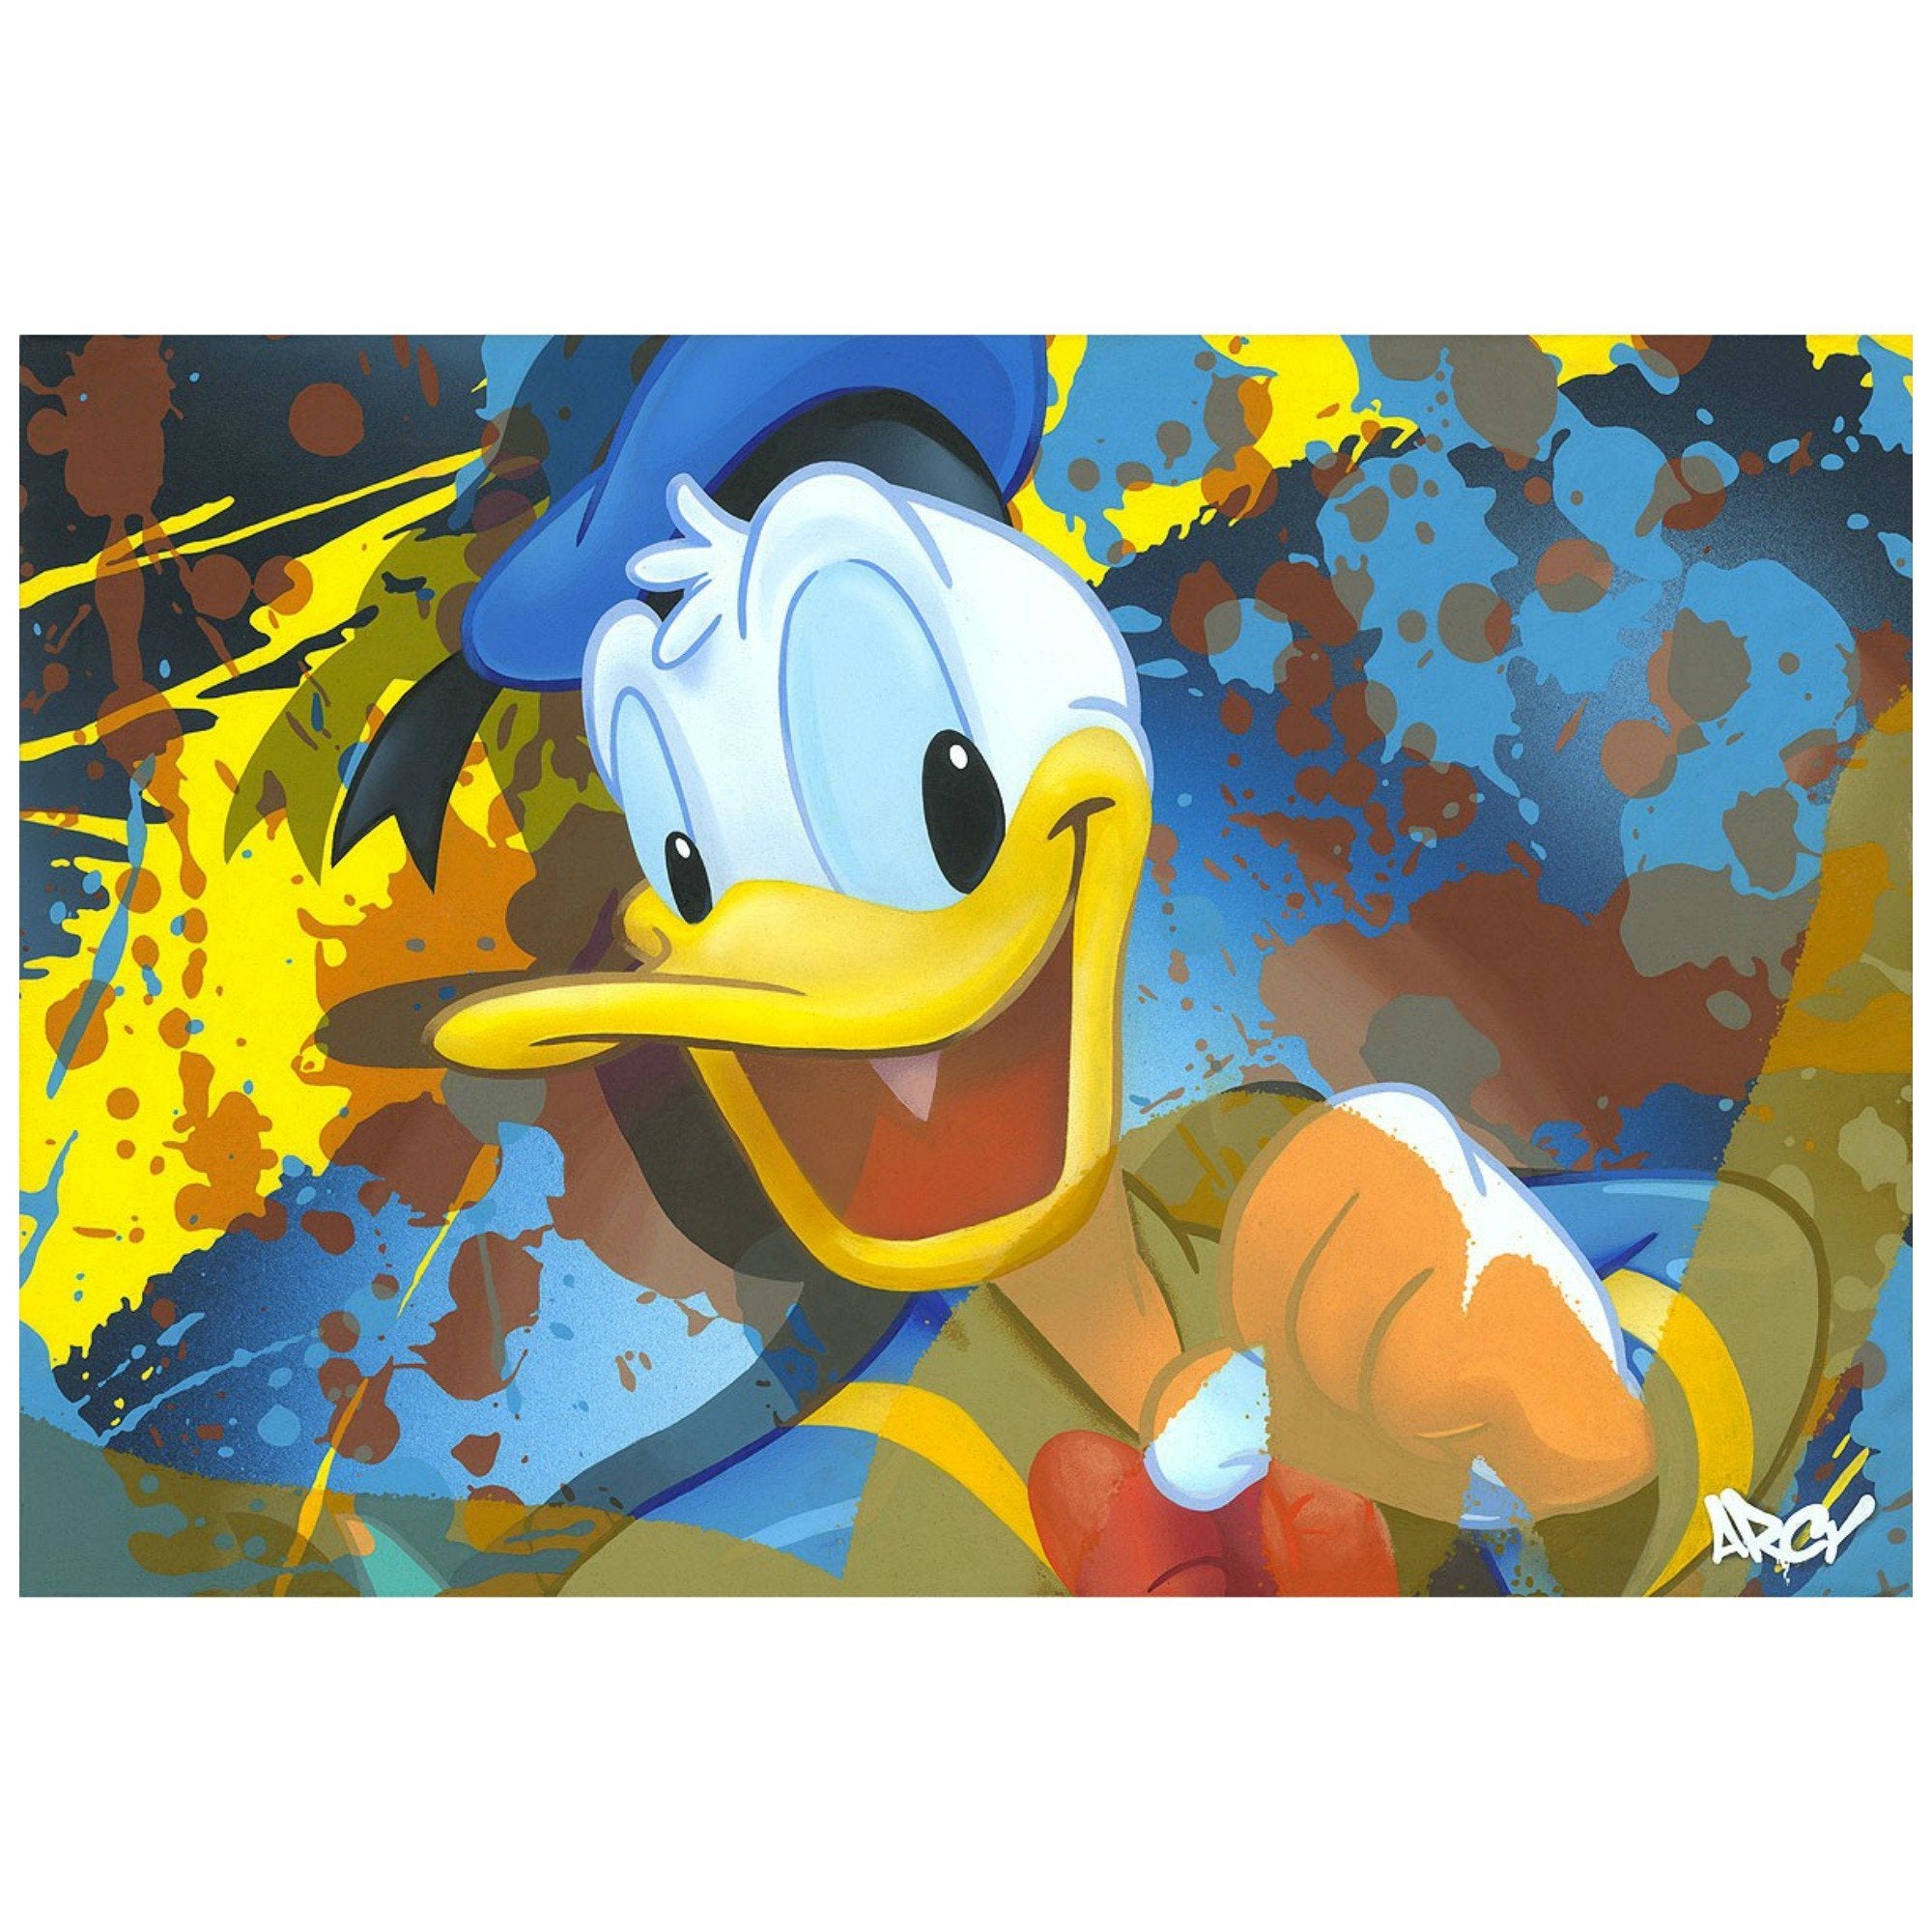 A happy Donald Duck, painted with a splash of colorful background. 